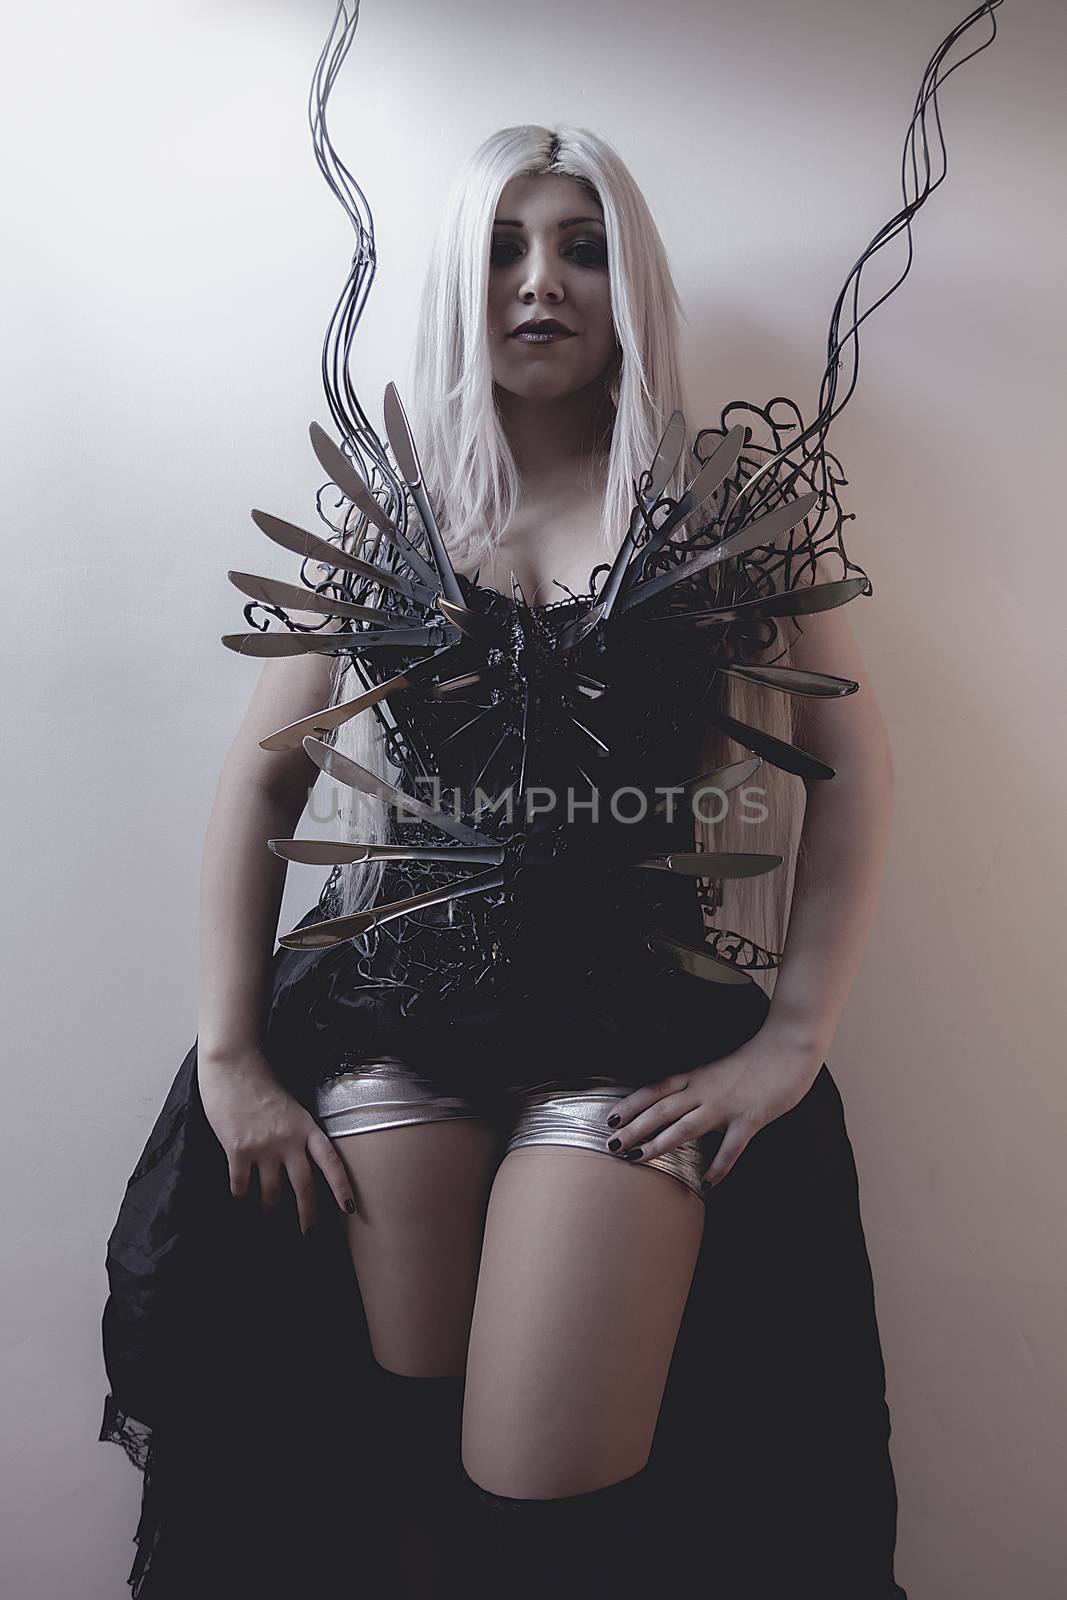 Gothic, Beautiful woman with white hair and beautiful eyes by FernandoCortes